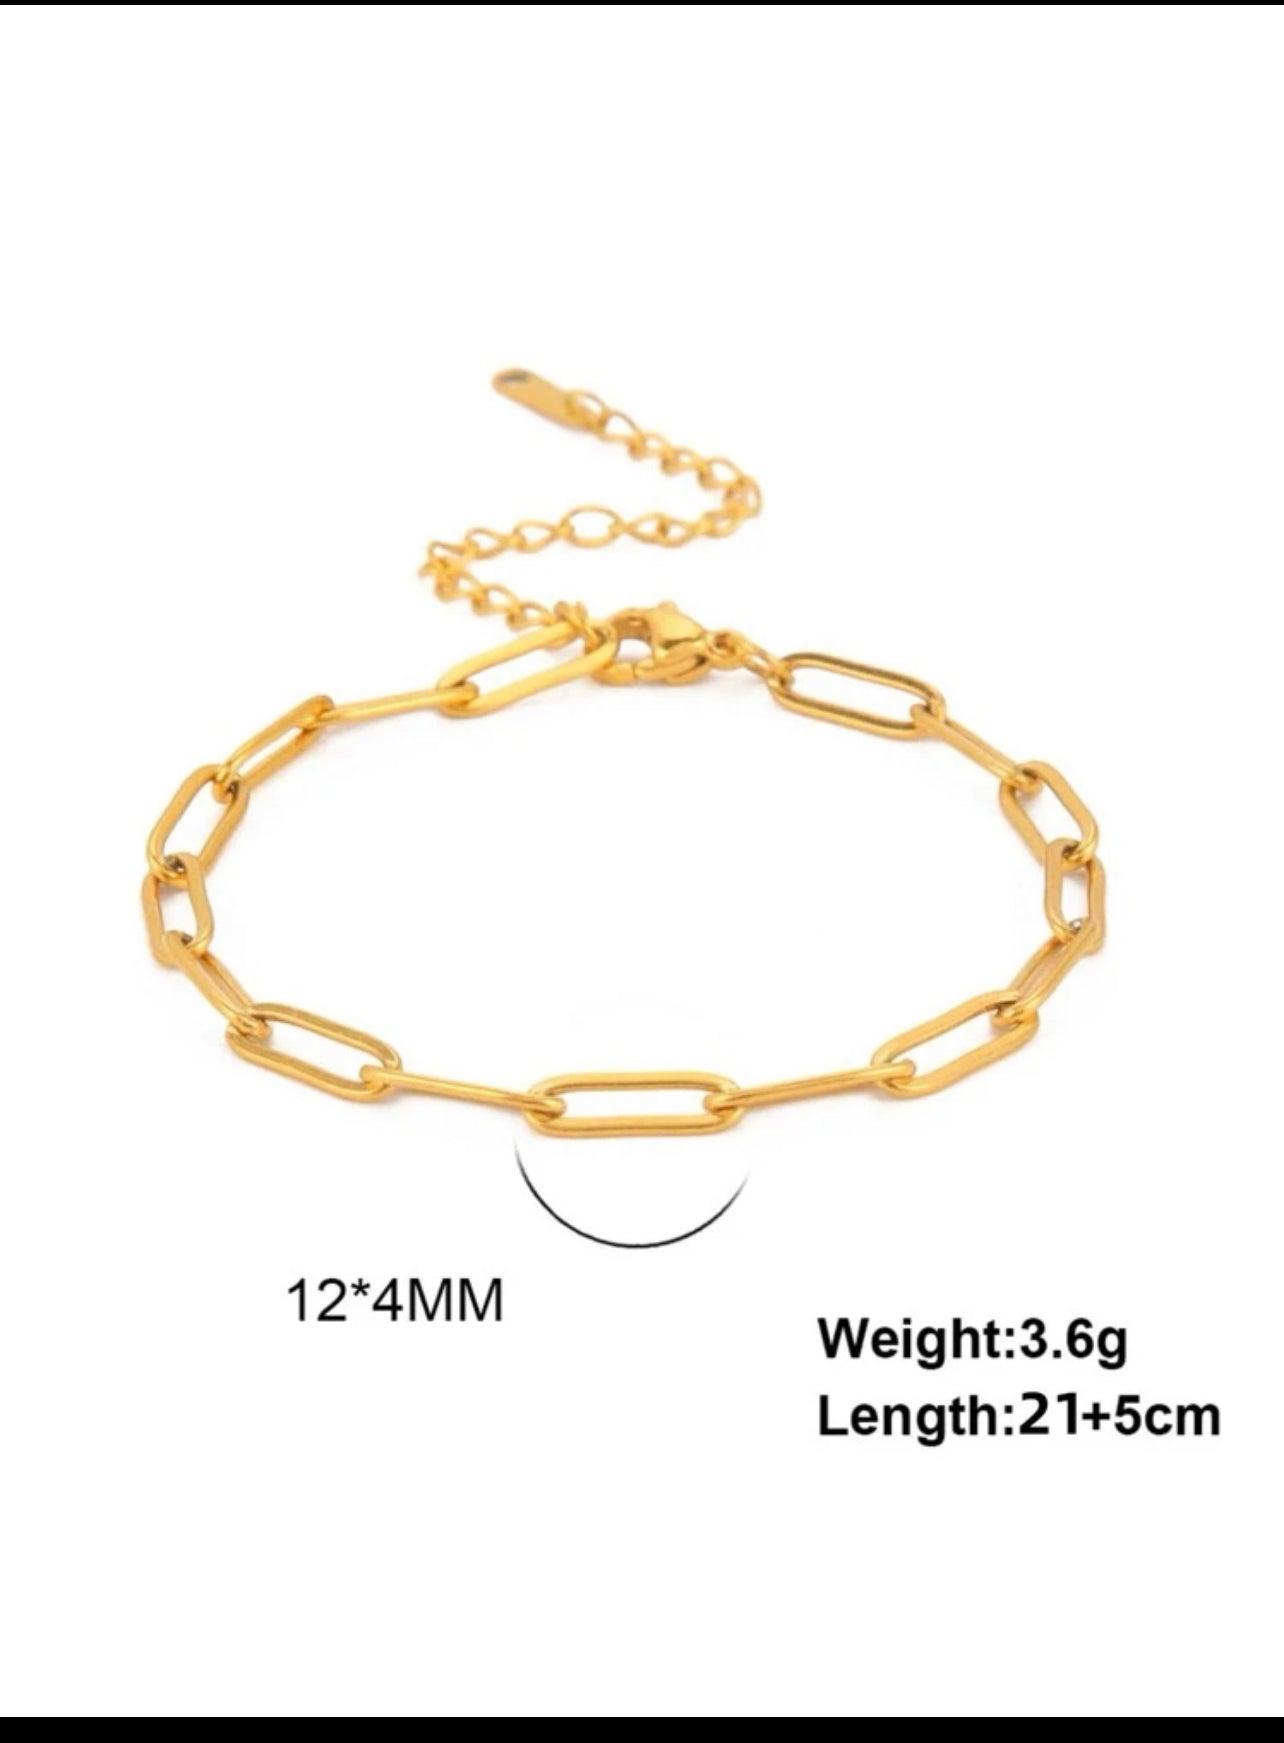 Zuri chain Women's Anklet Stainless Steel 18K Gold-Plated 20 cm / 25 cm to 30 cm Z113